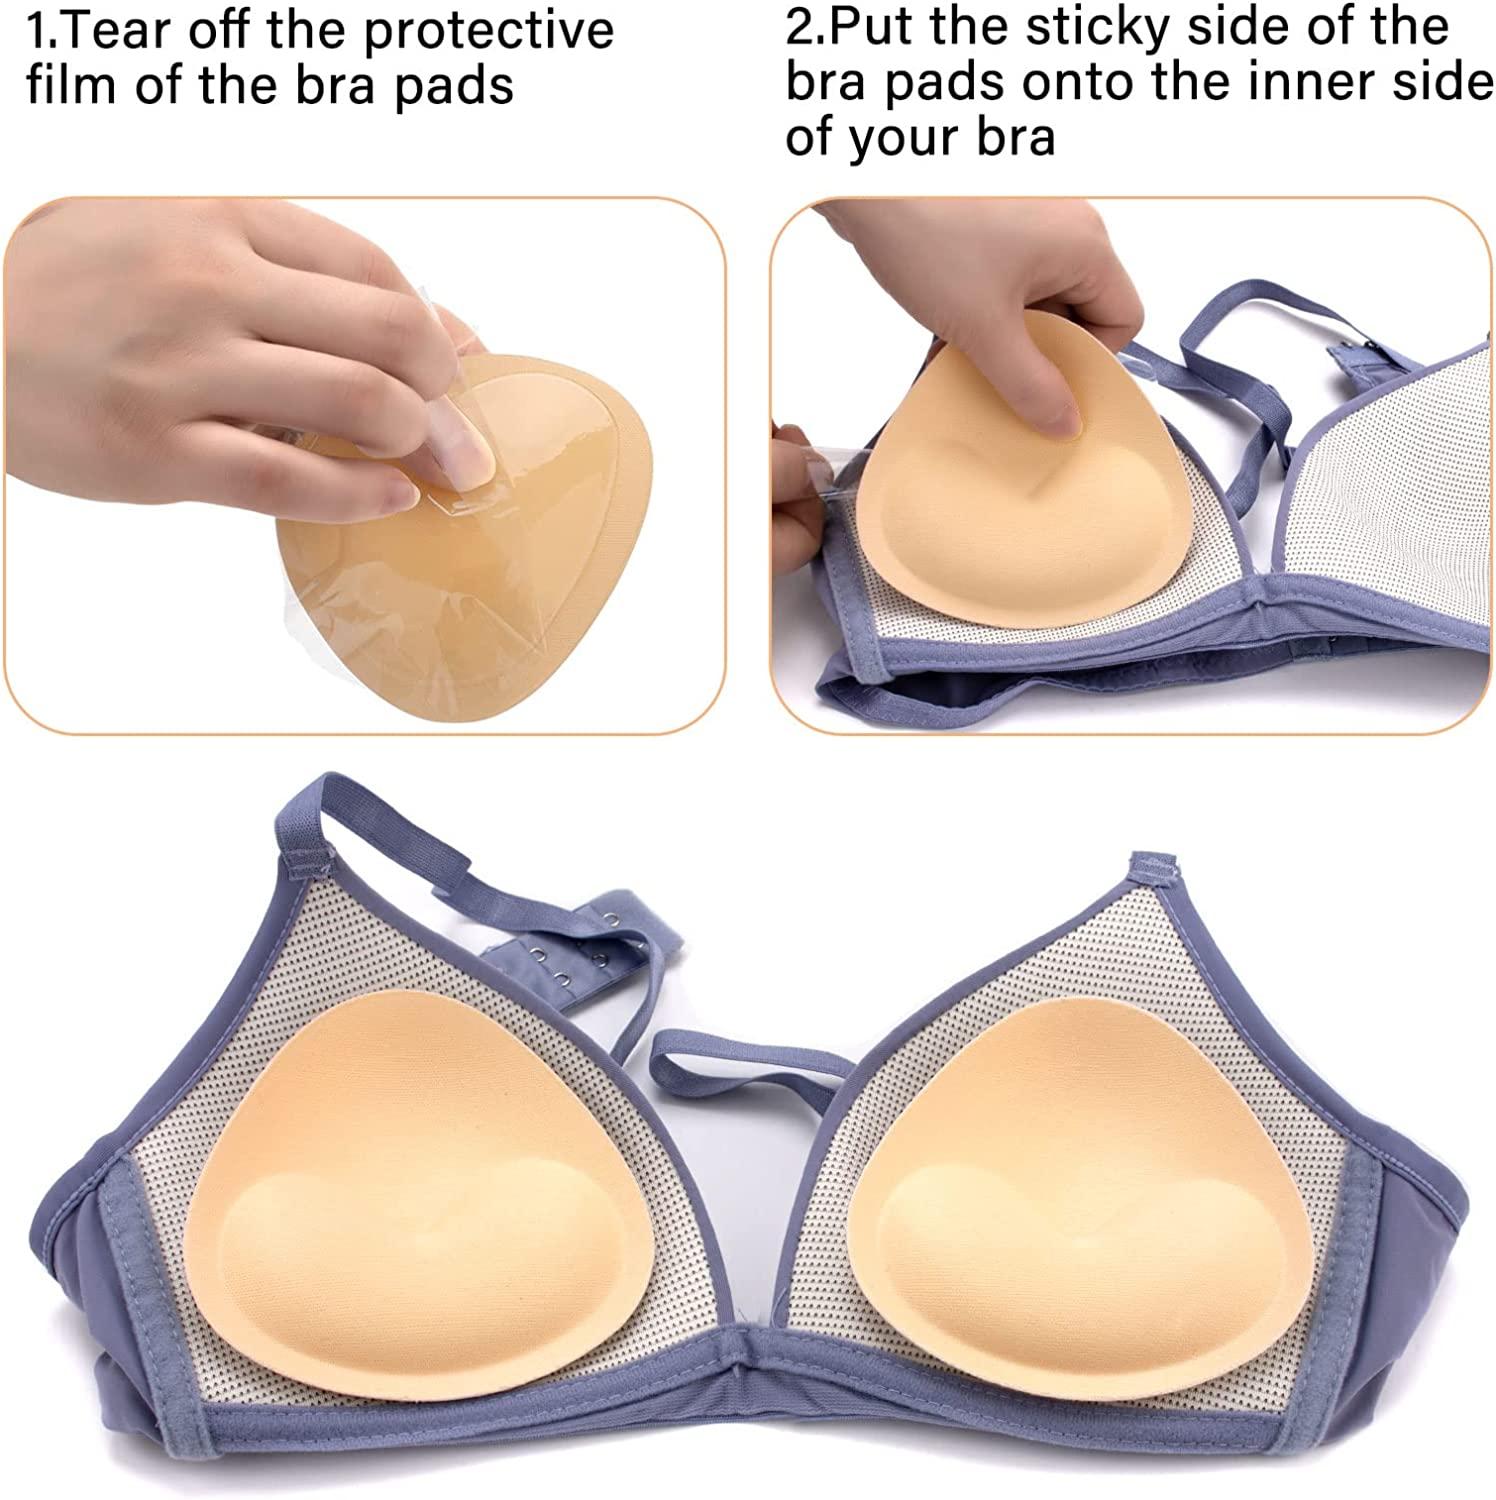 2 Pairs Self-adhesive Inserts Bra Pads Inserts Push Up Pads Removable Breast  Enhancement For Bras Bikini